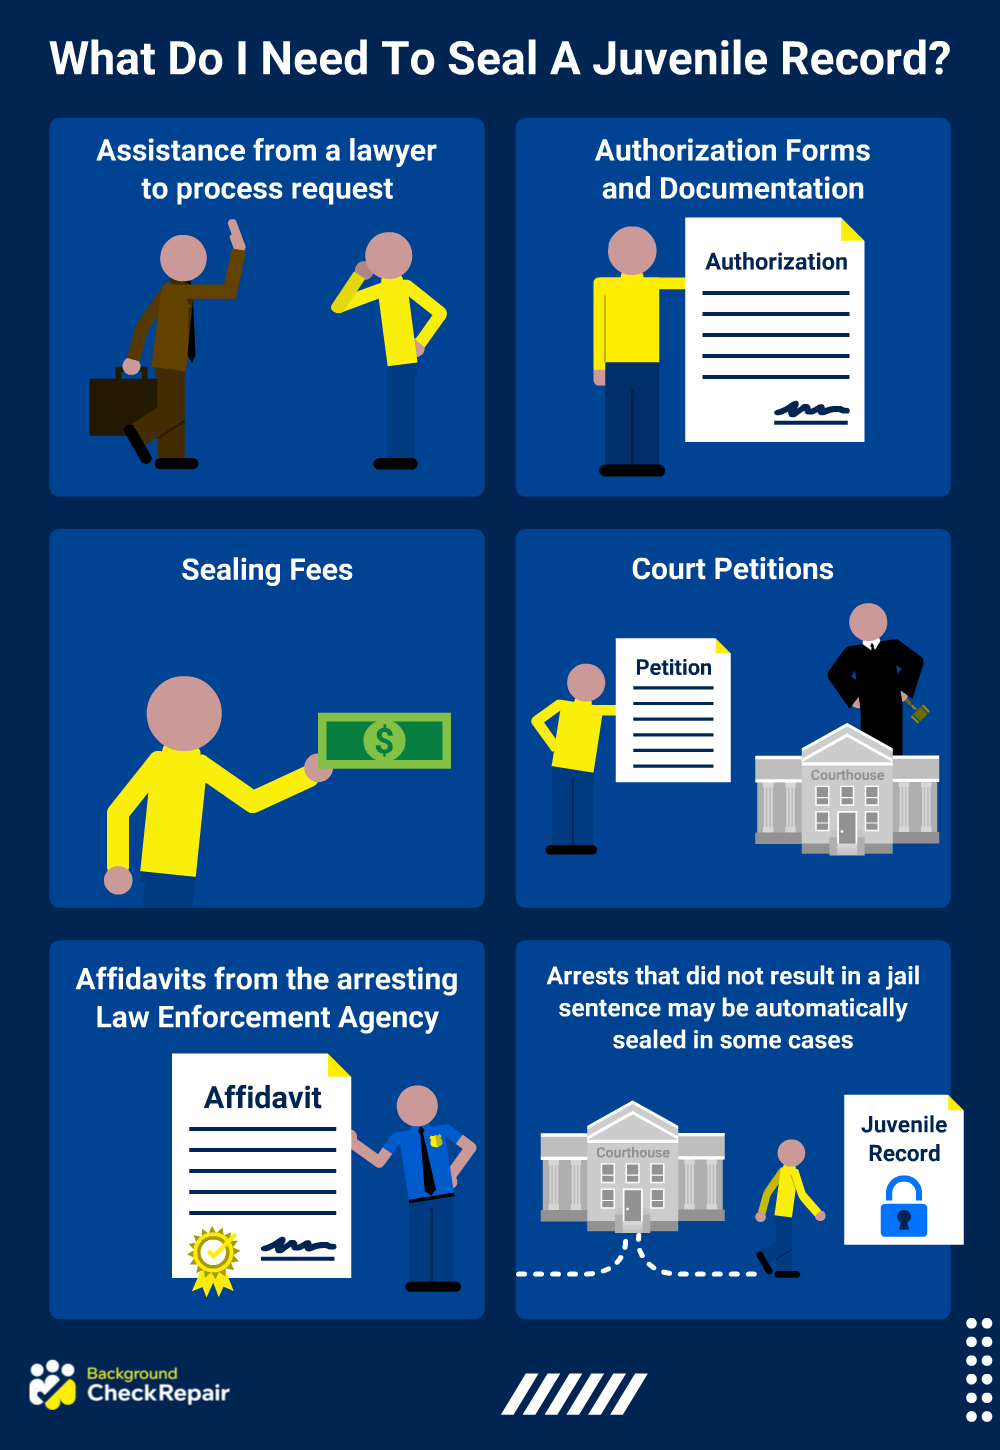 What do I need to seal a juvenile record graphic showing the sealing fee, court petitions, legal documents for juvenile records, proof that no other arrests have occurred and the authorization forms used to file applications for sealing juvenile records.